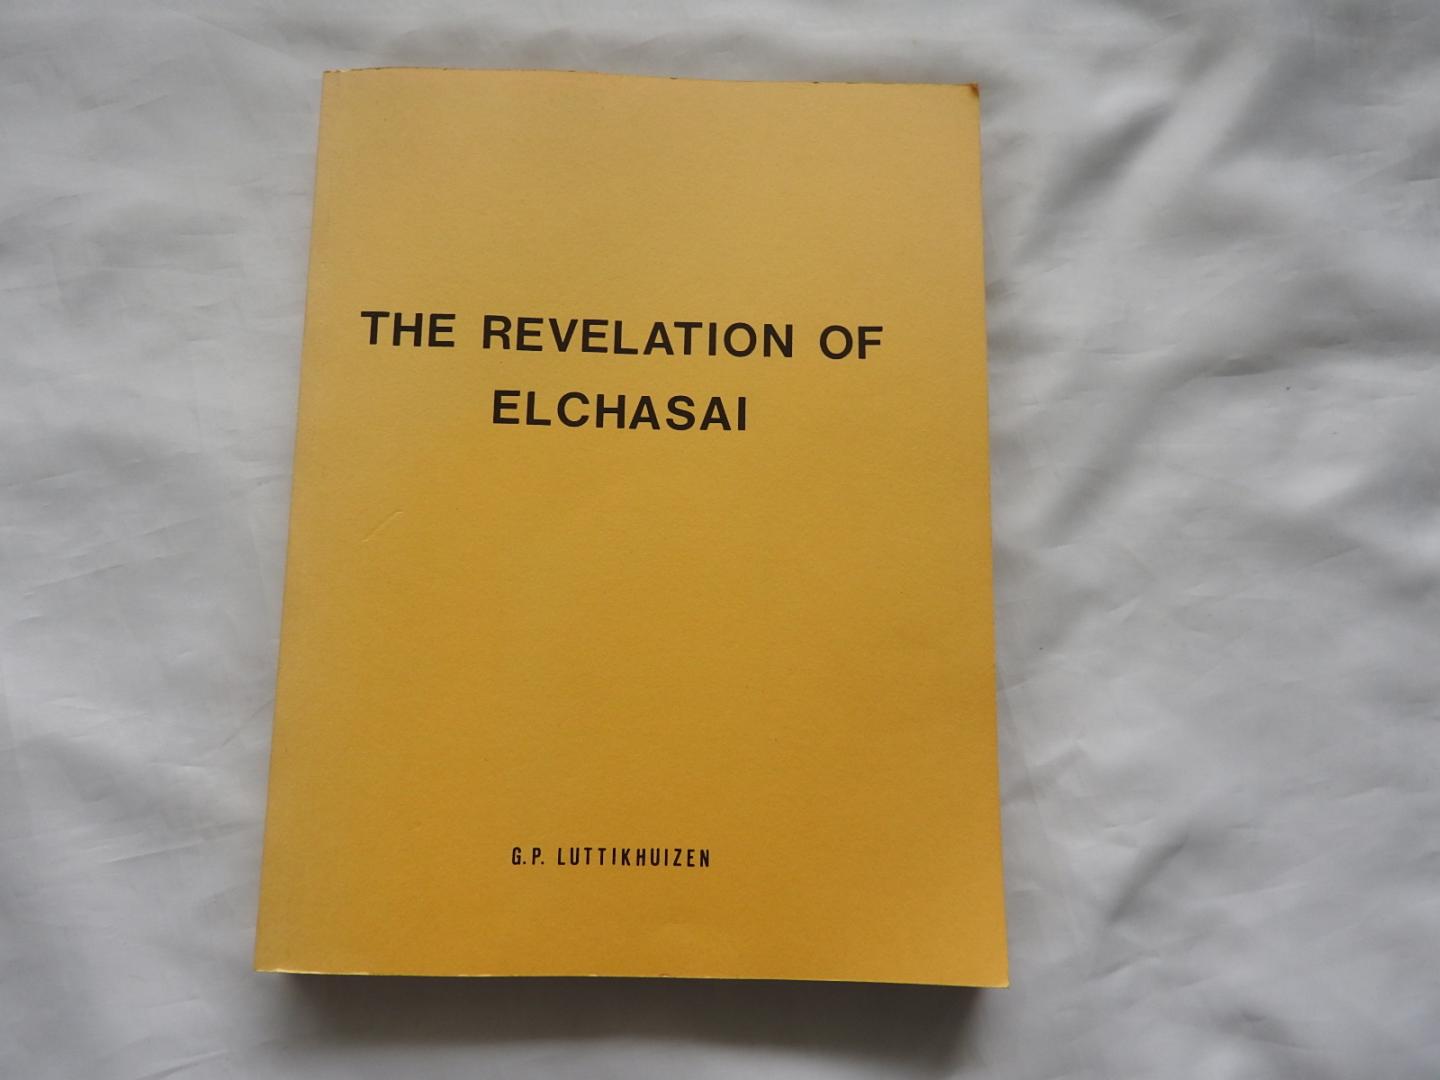 Luttikhuizen, Gerard P. G. - The Revelation of Elchasai / Investigations into the Evidence for a Mesopotamian Jewish Apocalypse of the Second Century and its Reception by Judeo-Christian Propagandists